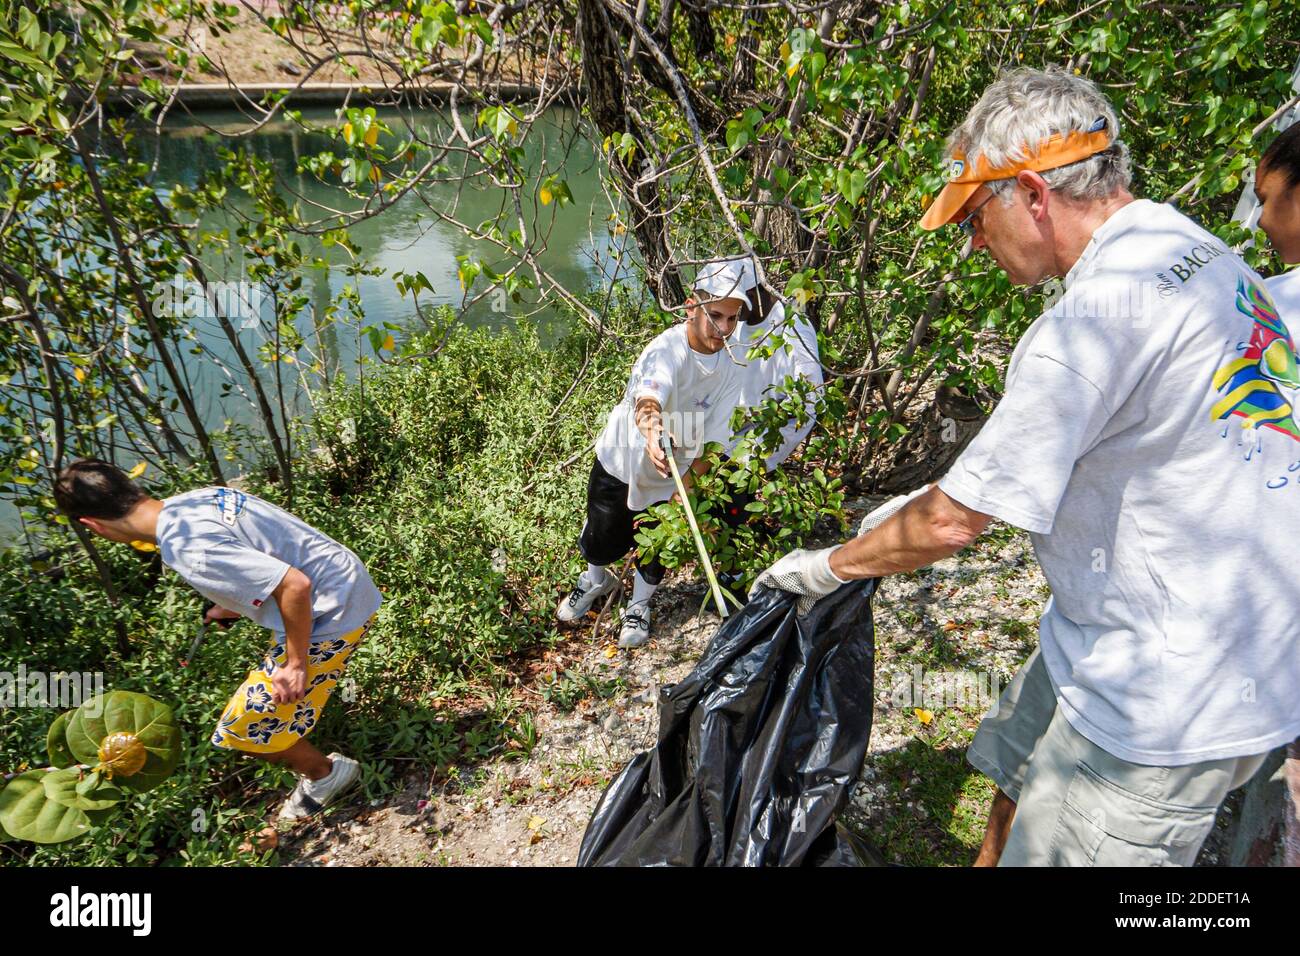 Miami Beach Florida,Dade Canal teenagers teens students,Job Corps workers volunteers cleaning collecting collect trash,boys senior man plastic bag rea Stock Photo